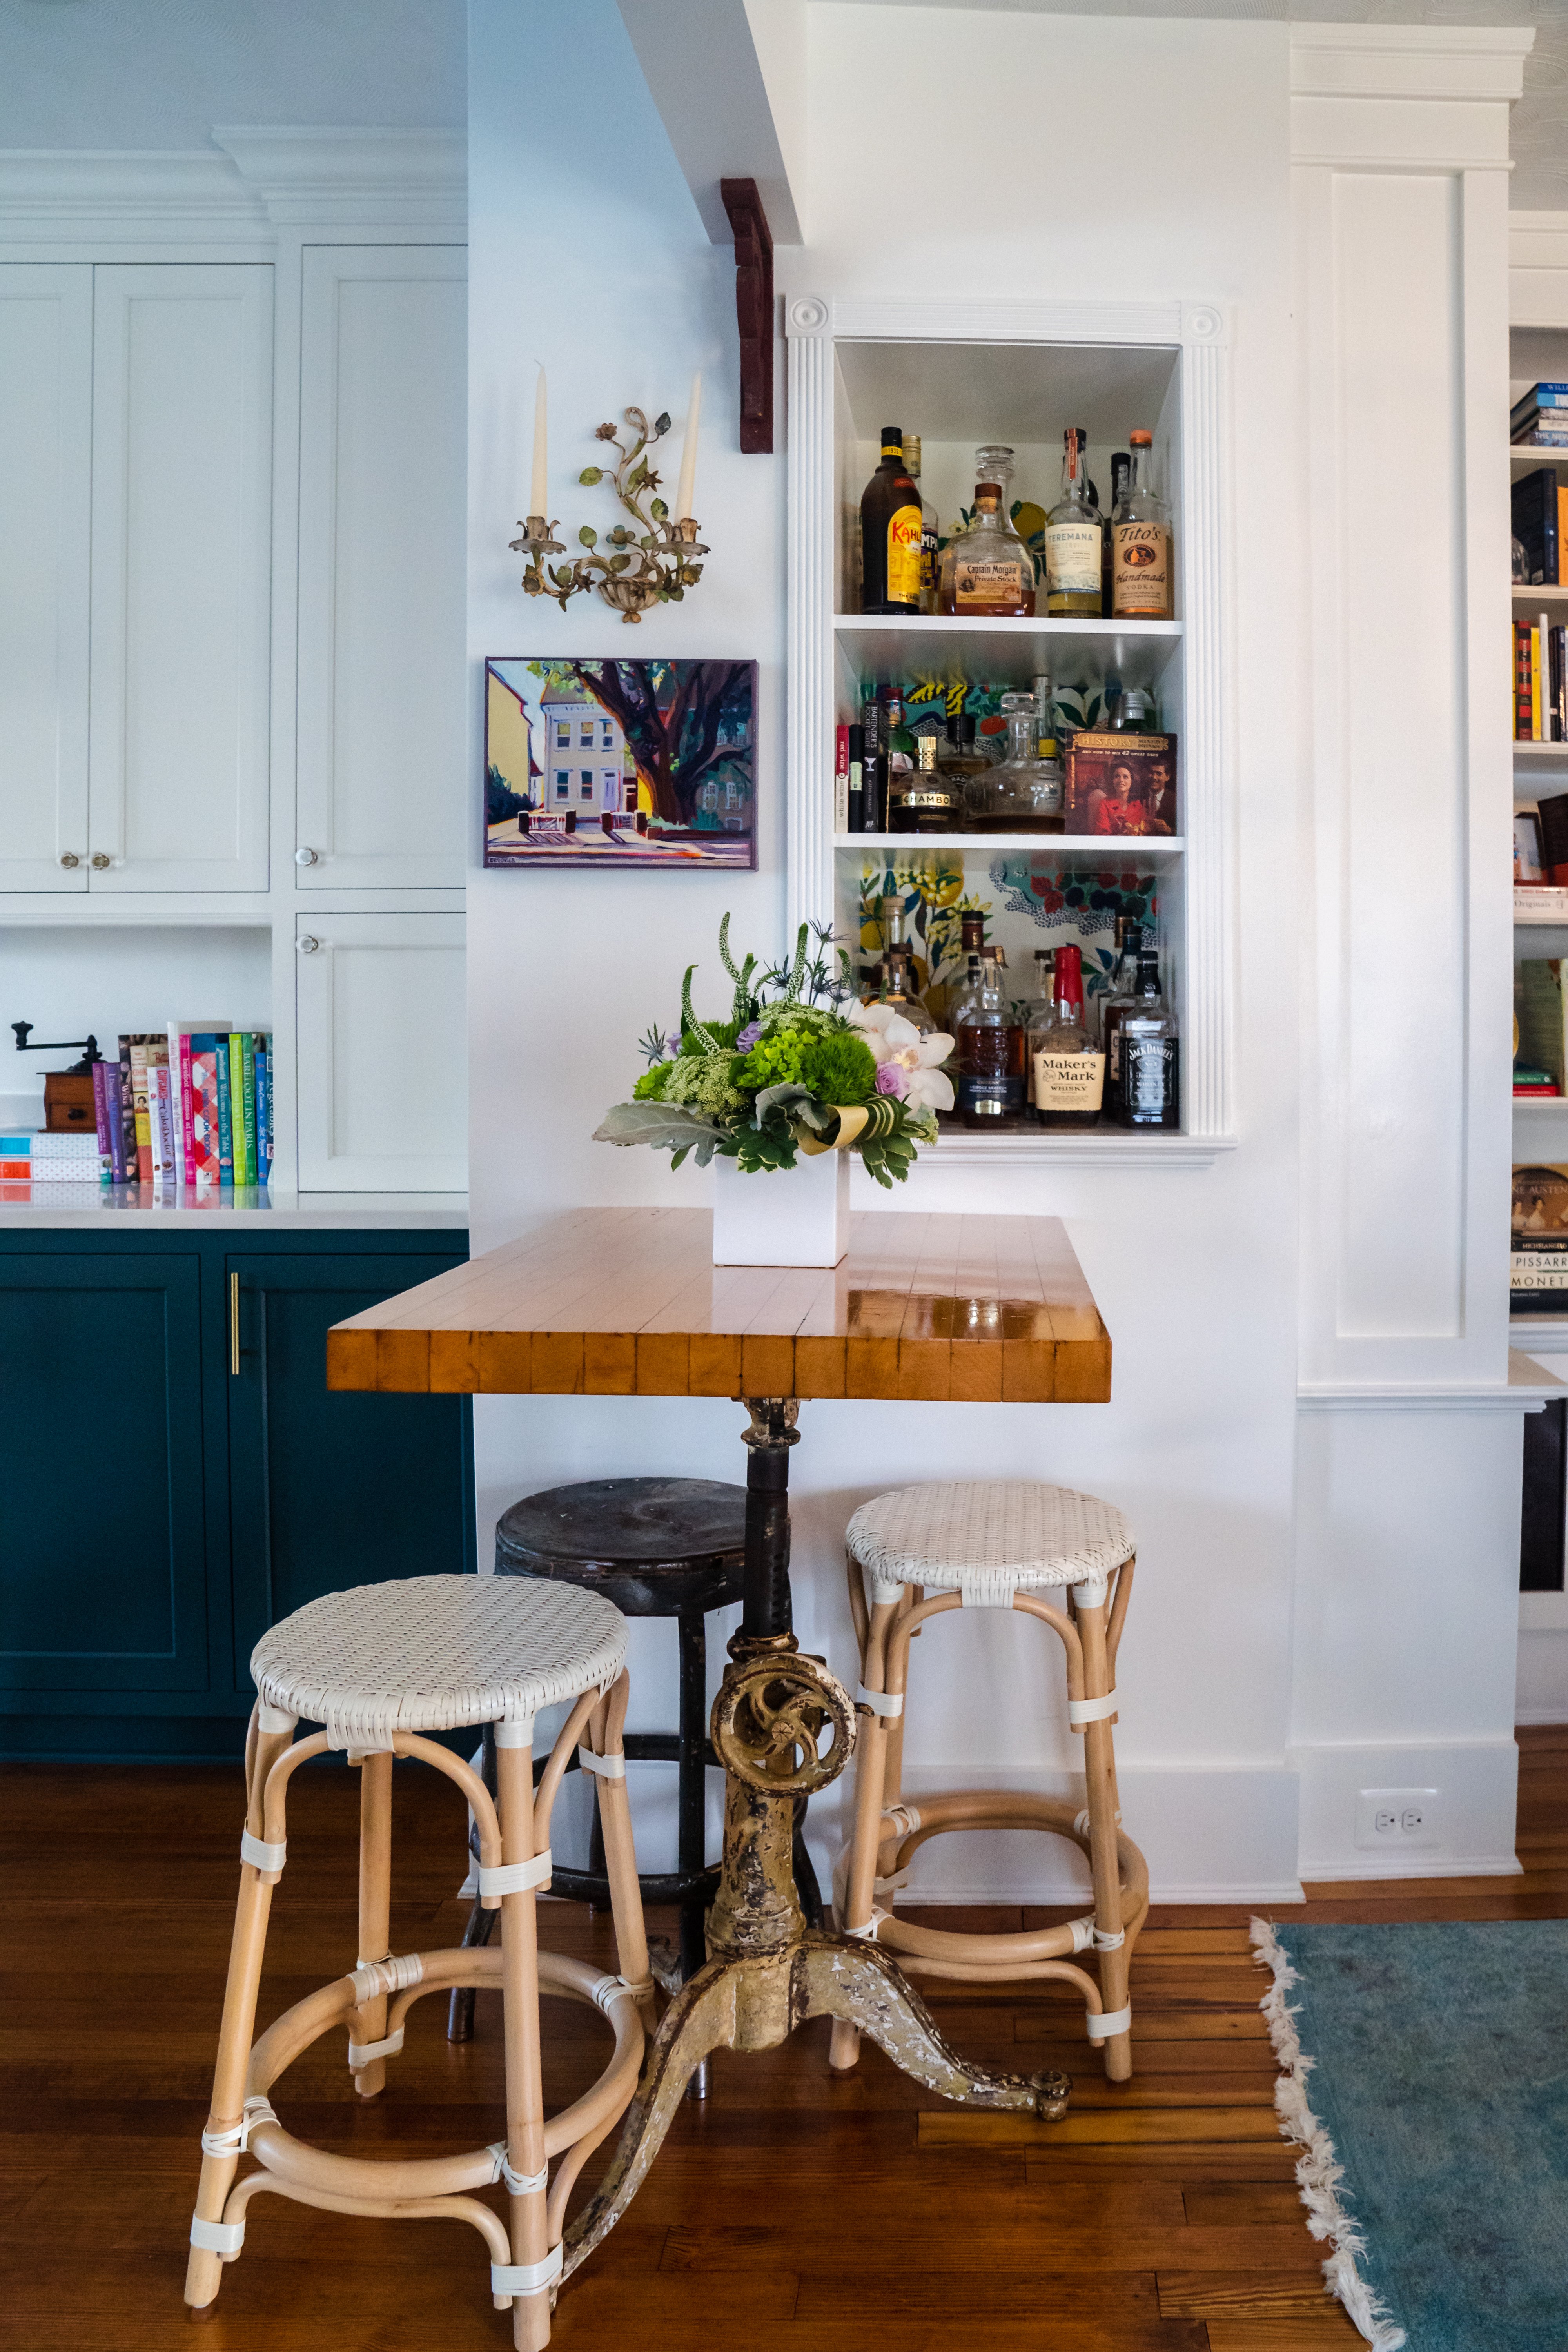 Small table with bar stools